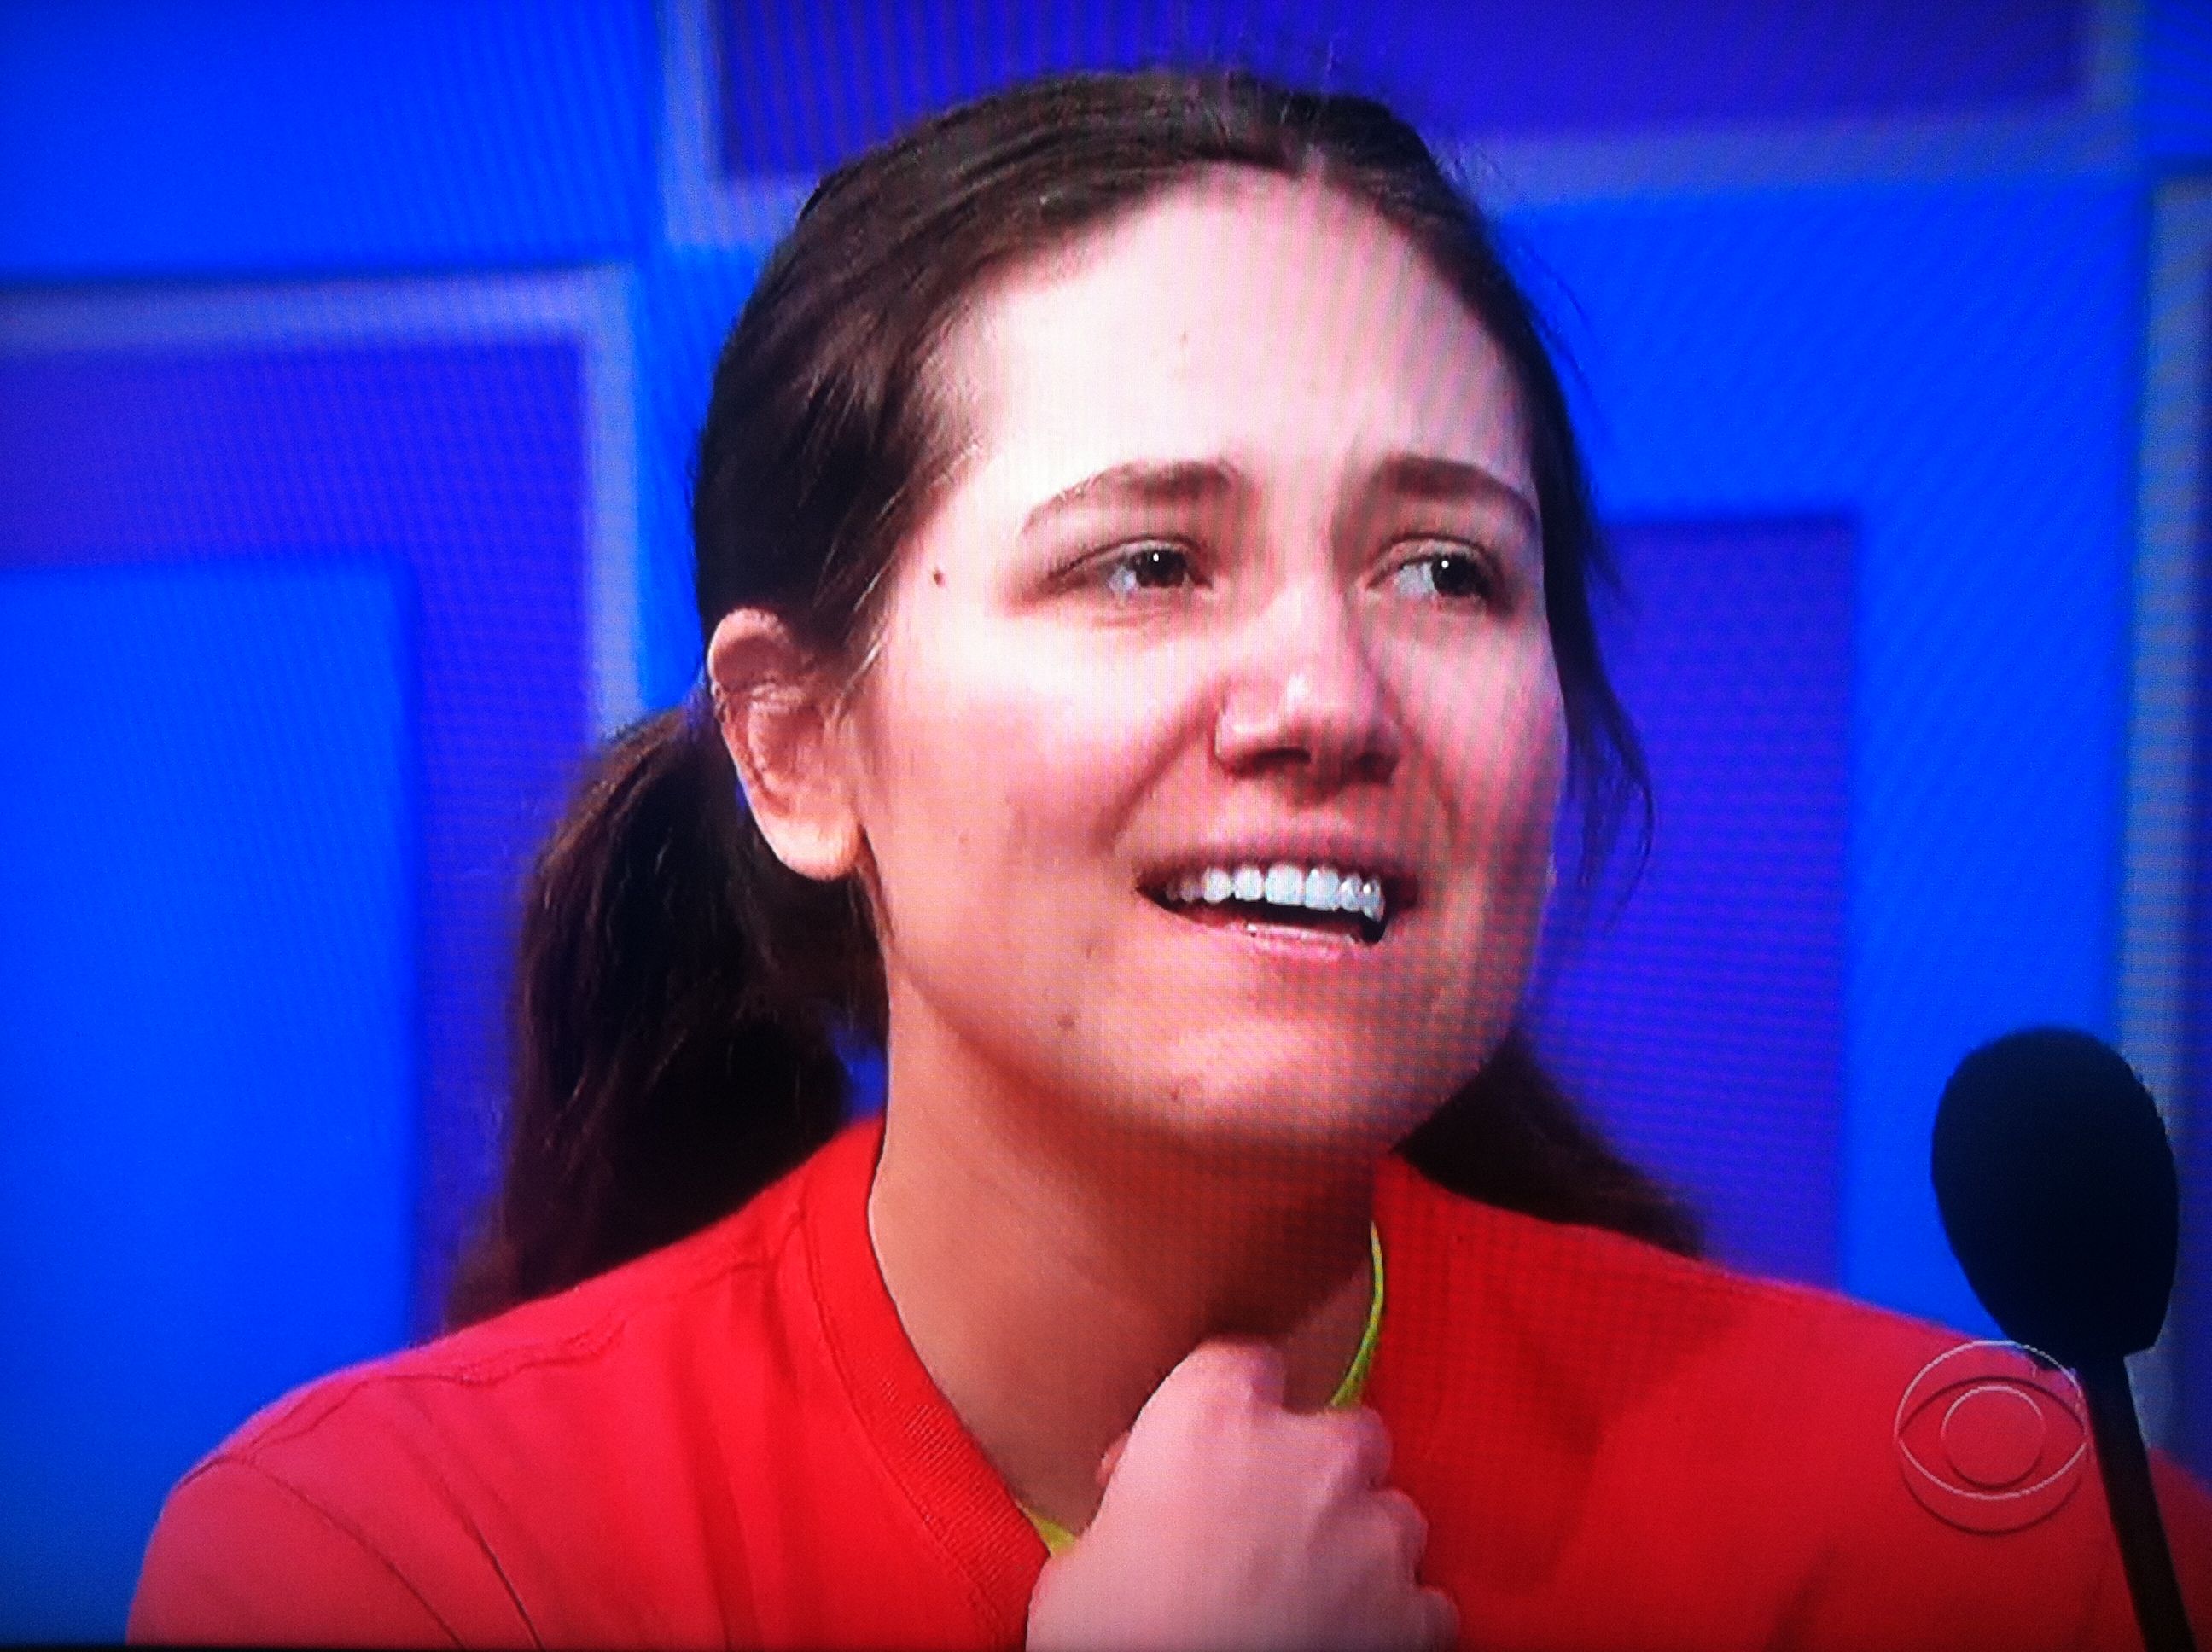 Aurora De Lucia looking quite nervous on The Price is Right